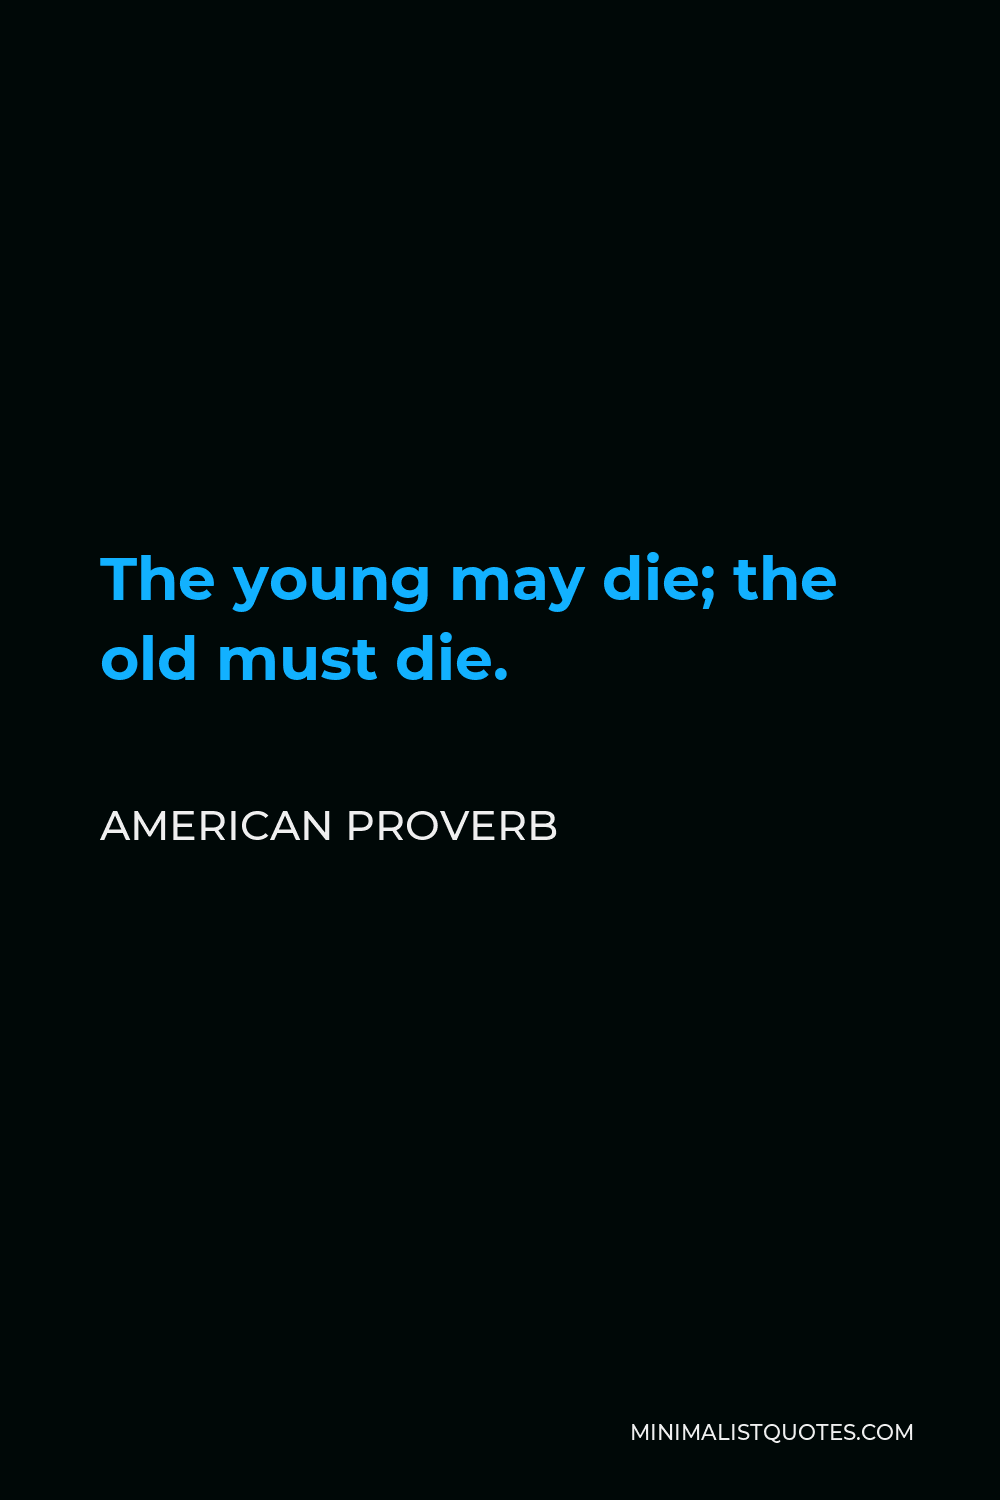 American Proverb Quote - The young may die; the old must die.